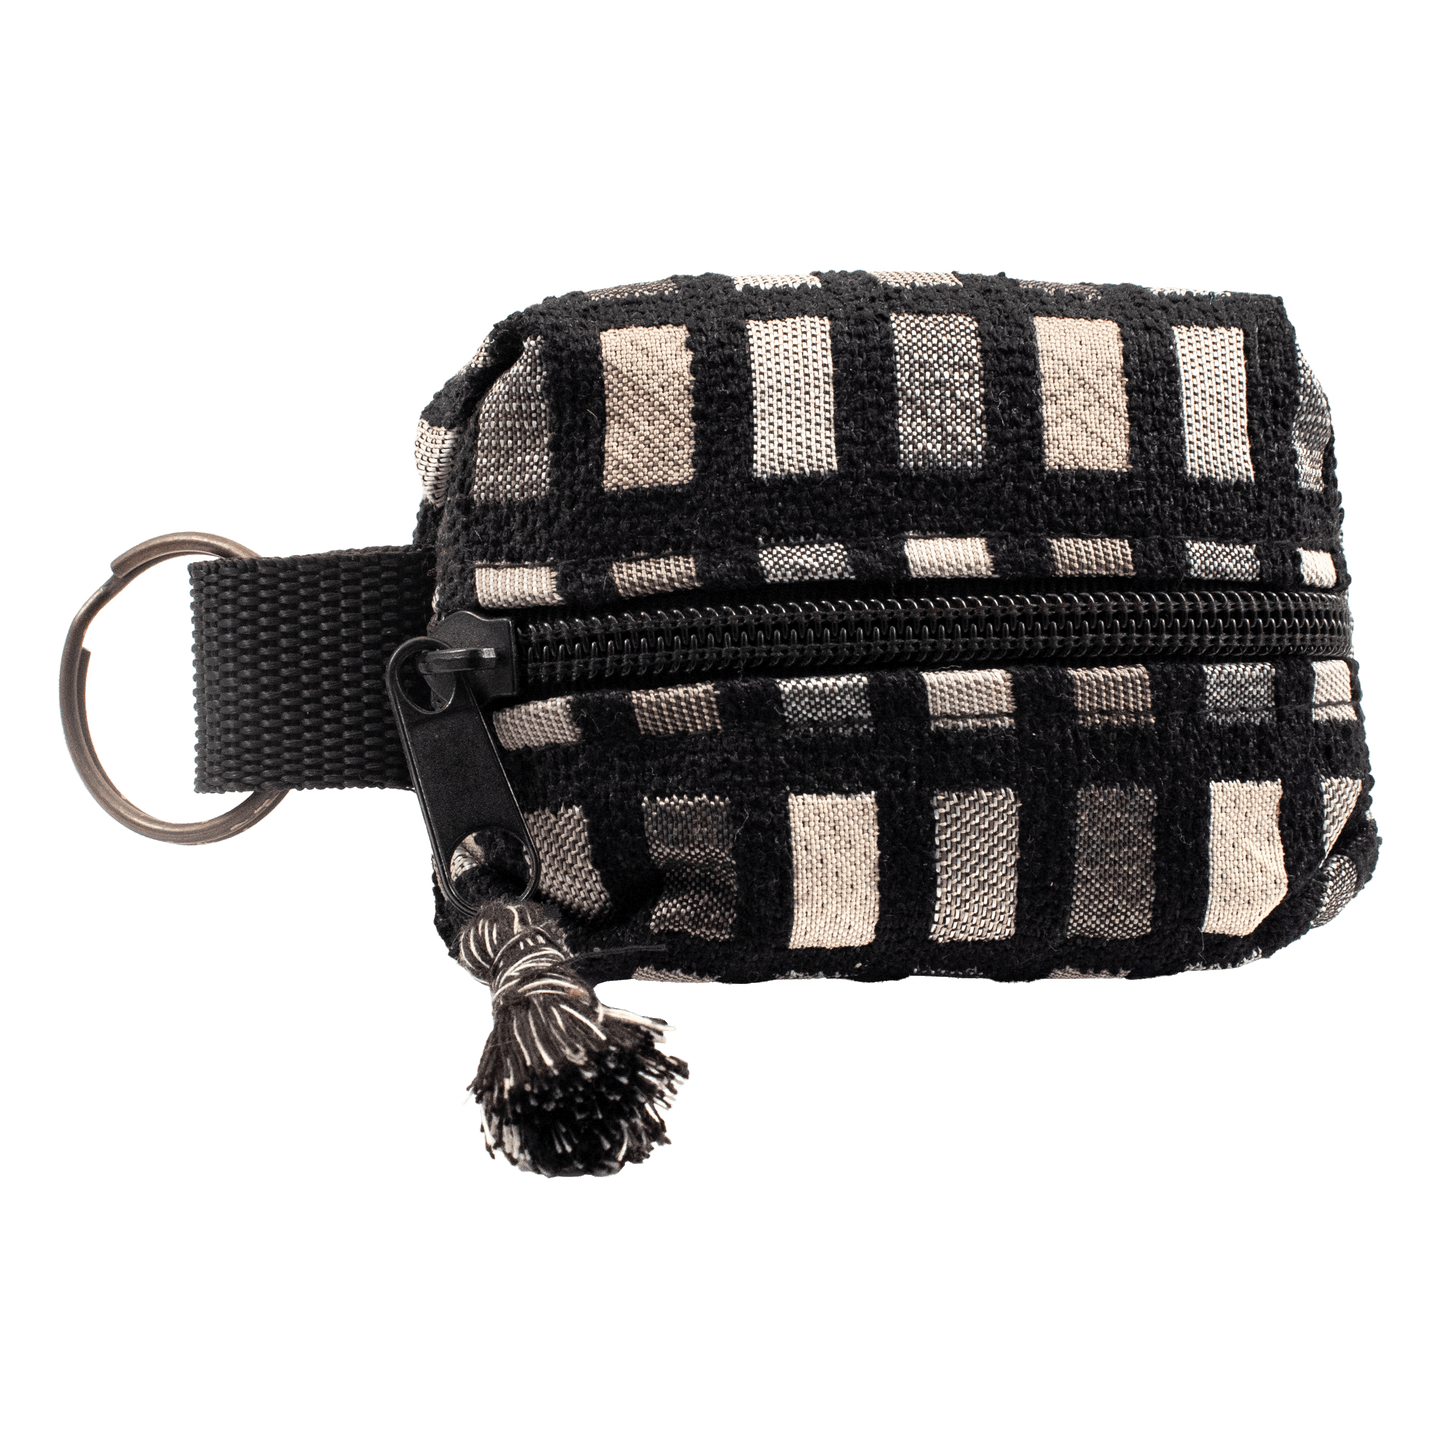 Mini Pouch Purse Keychain (Various Patterns)